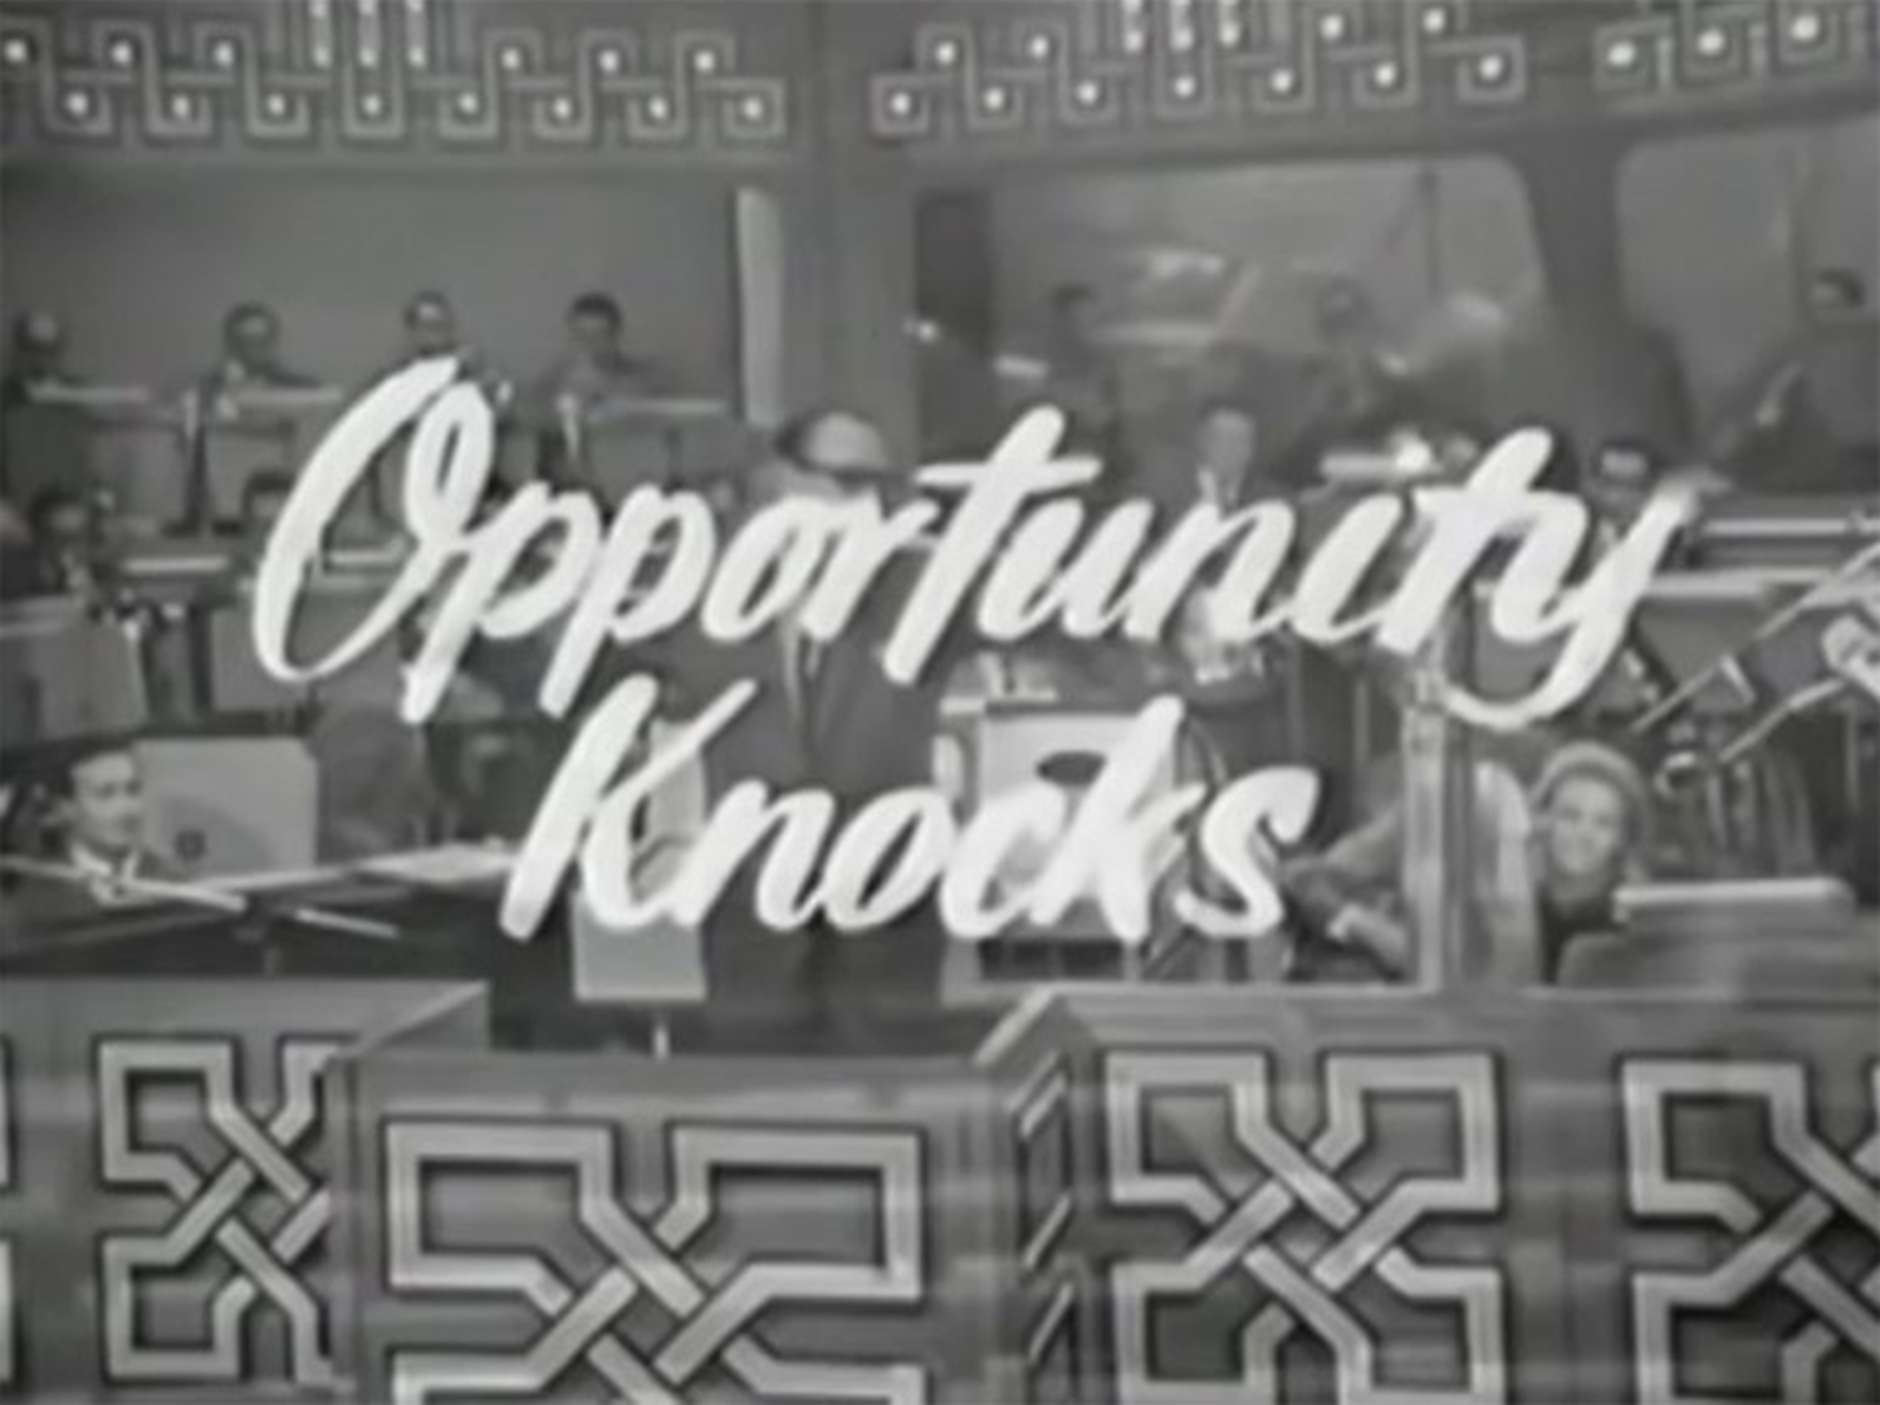 a black and white still of 'opportunity knocks'